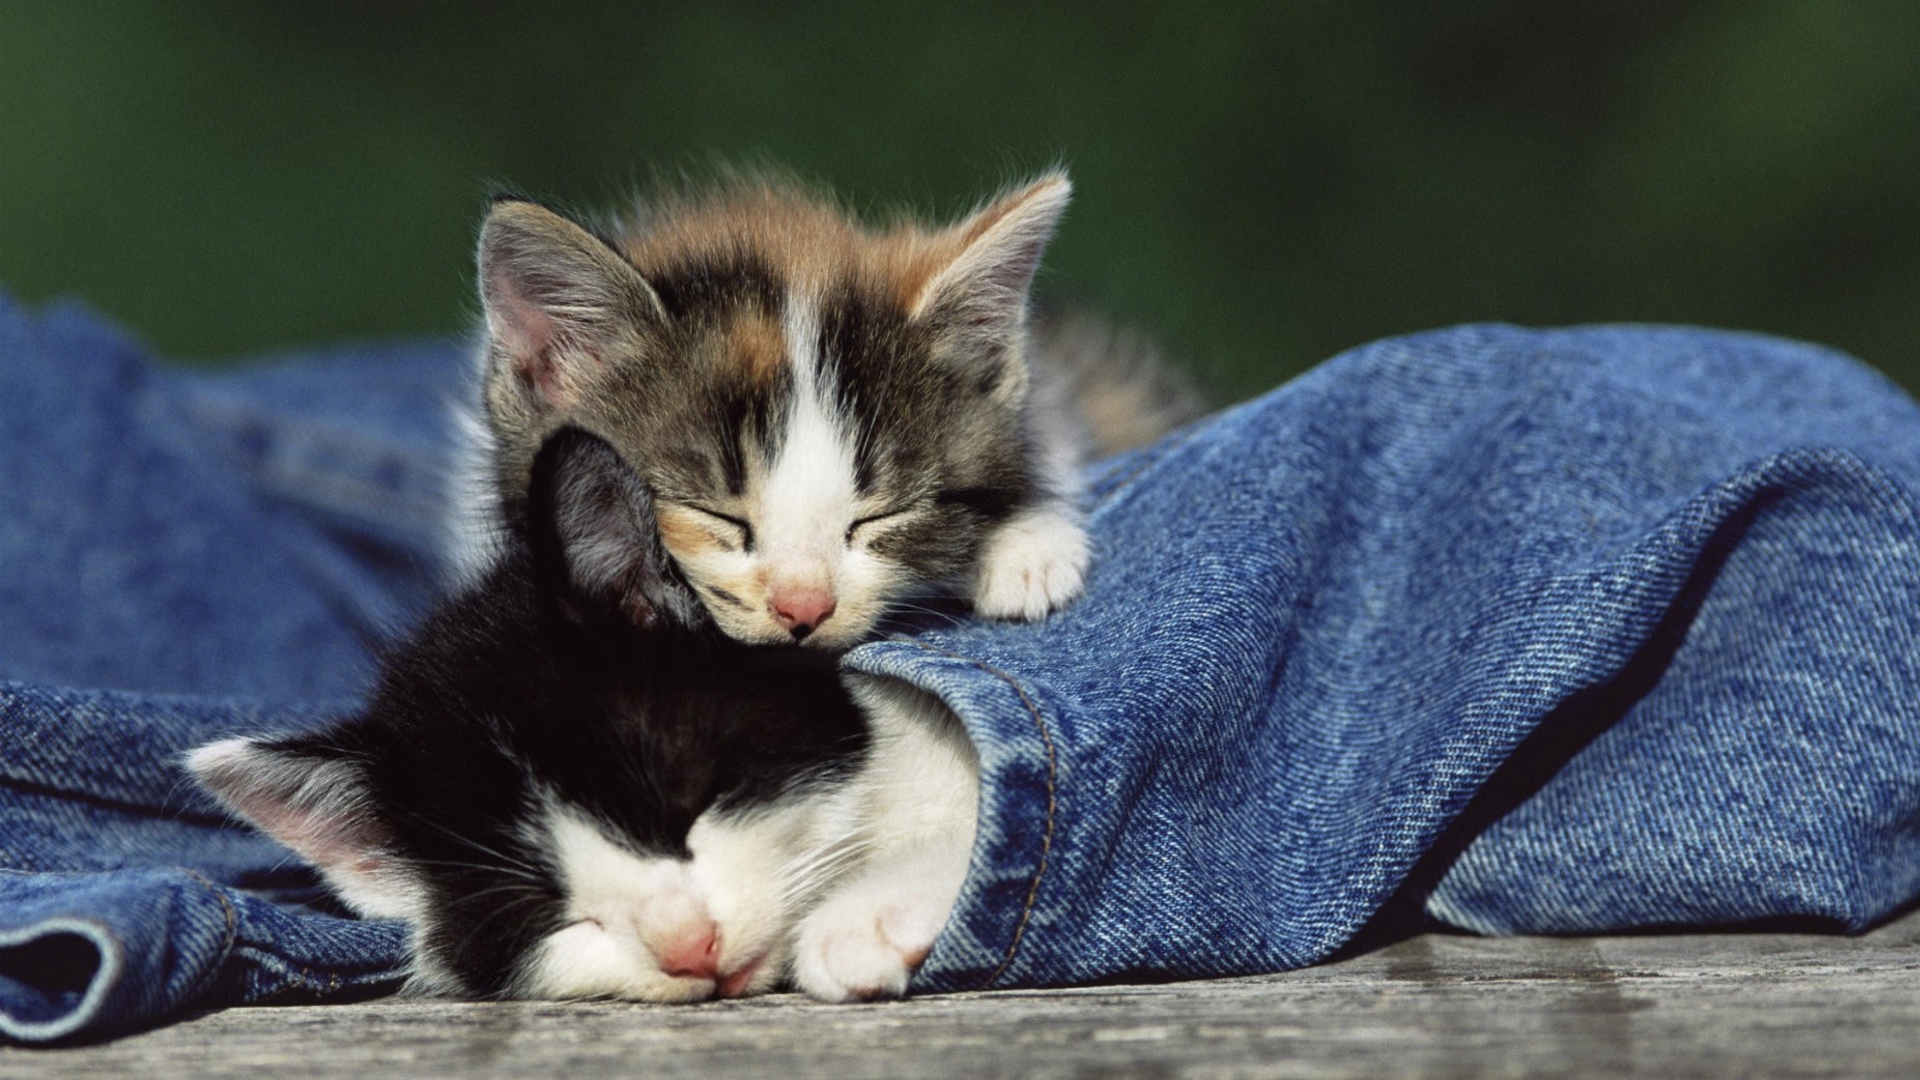 Cute Cats And Jeans wallpaper 1920x1080